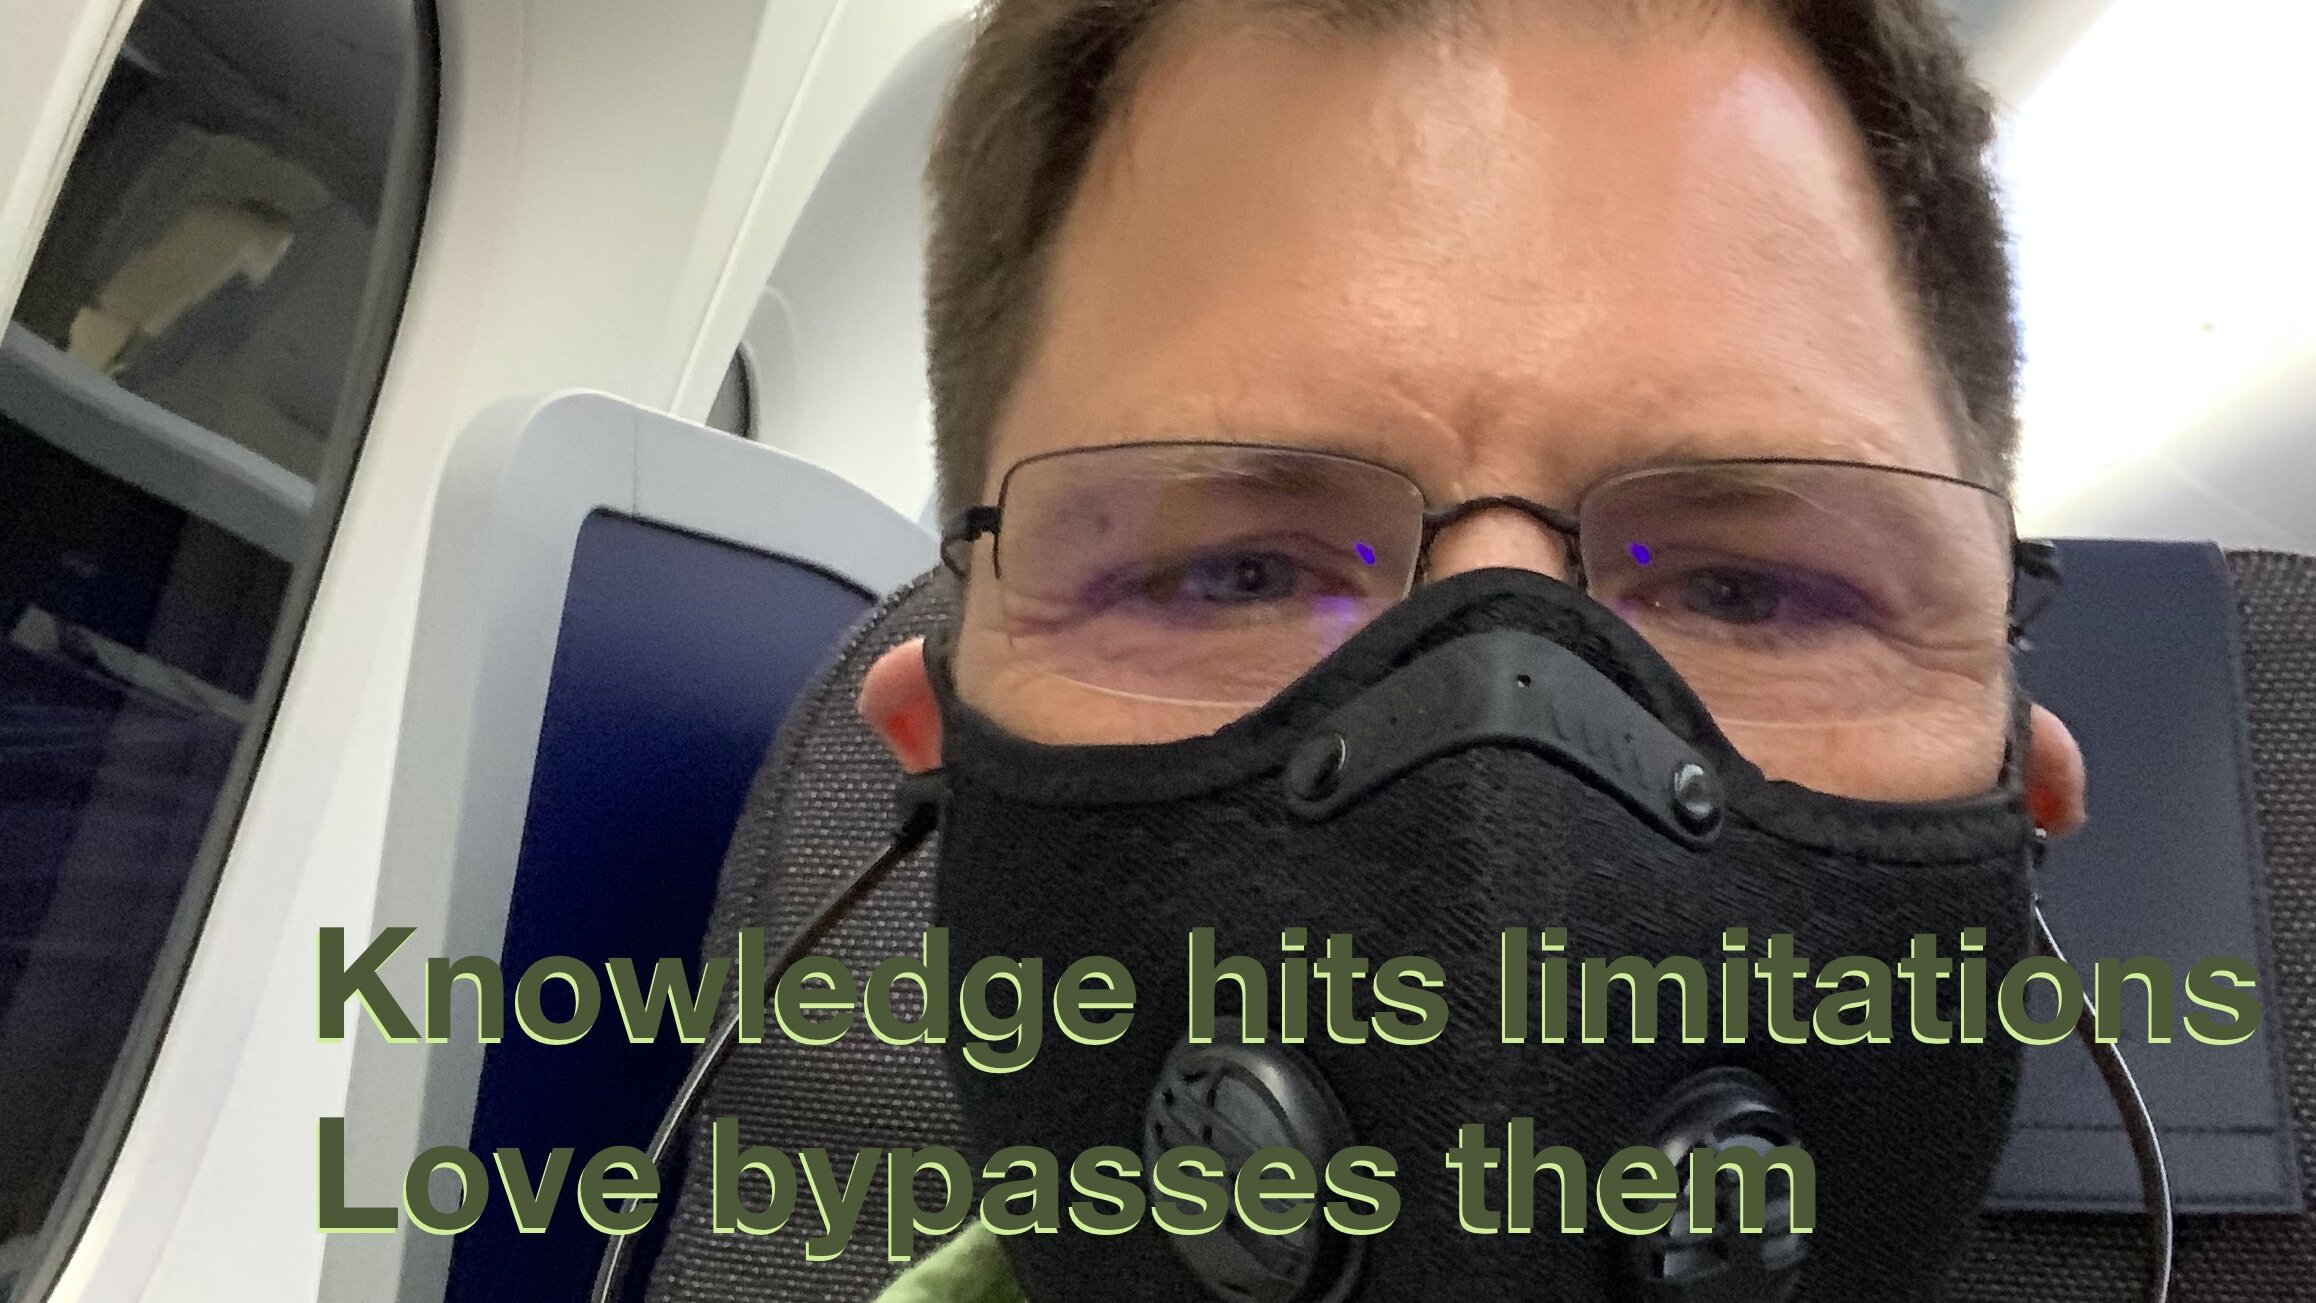 Plane ride back from Manila February 25th. I had the mask because of the active volcano there but wore it to be sensitive to others on my return home to the US.